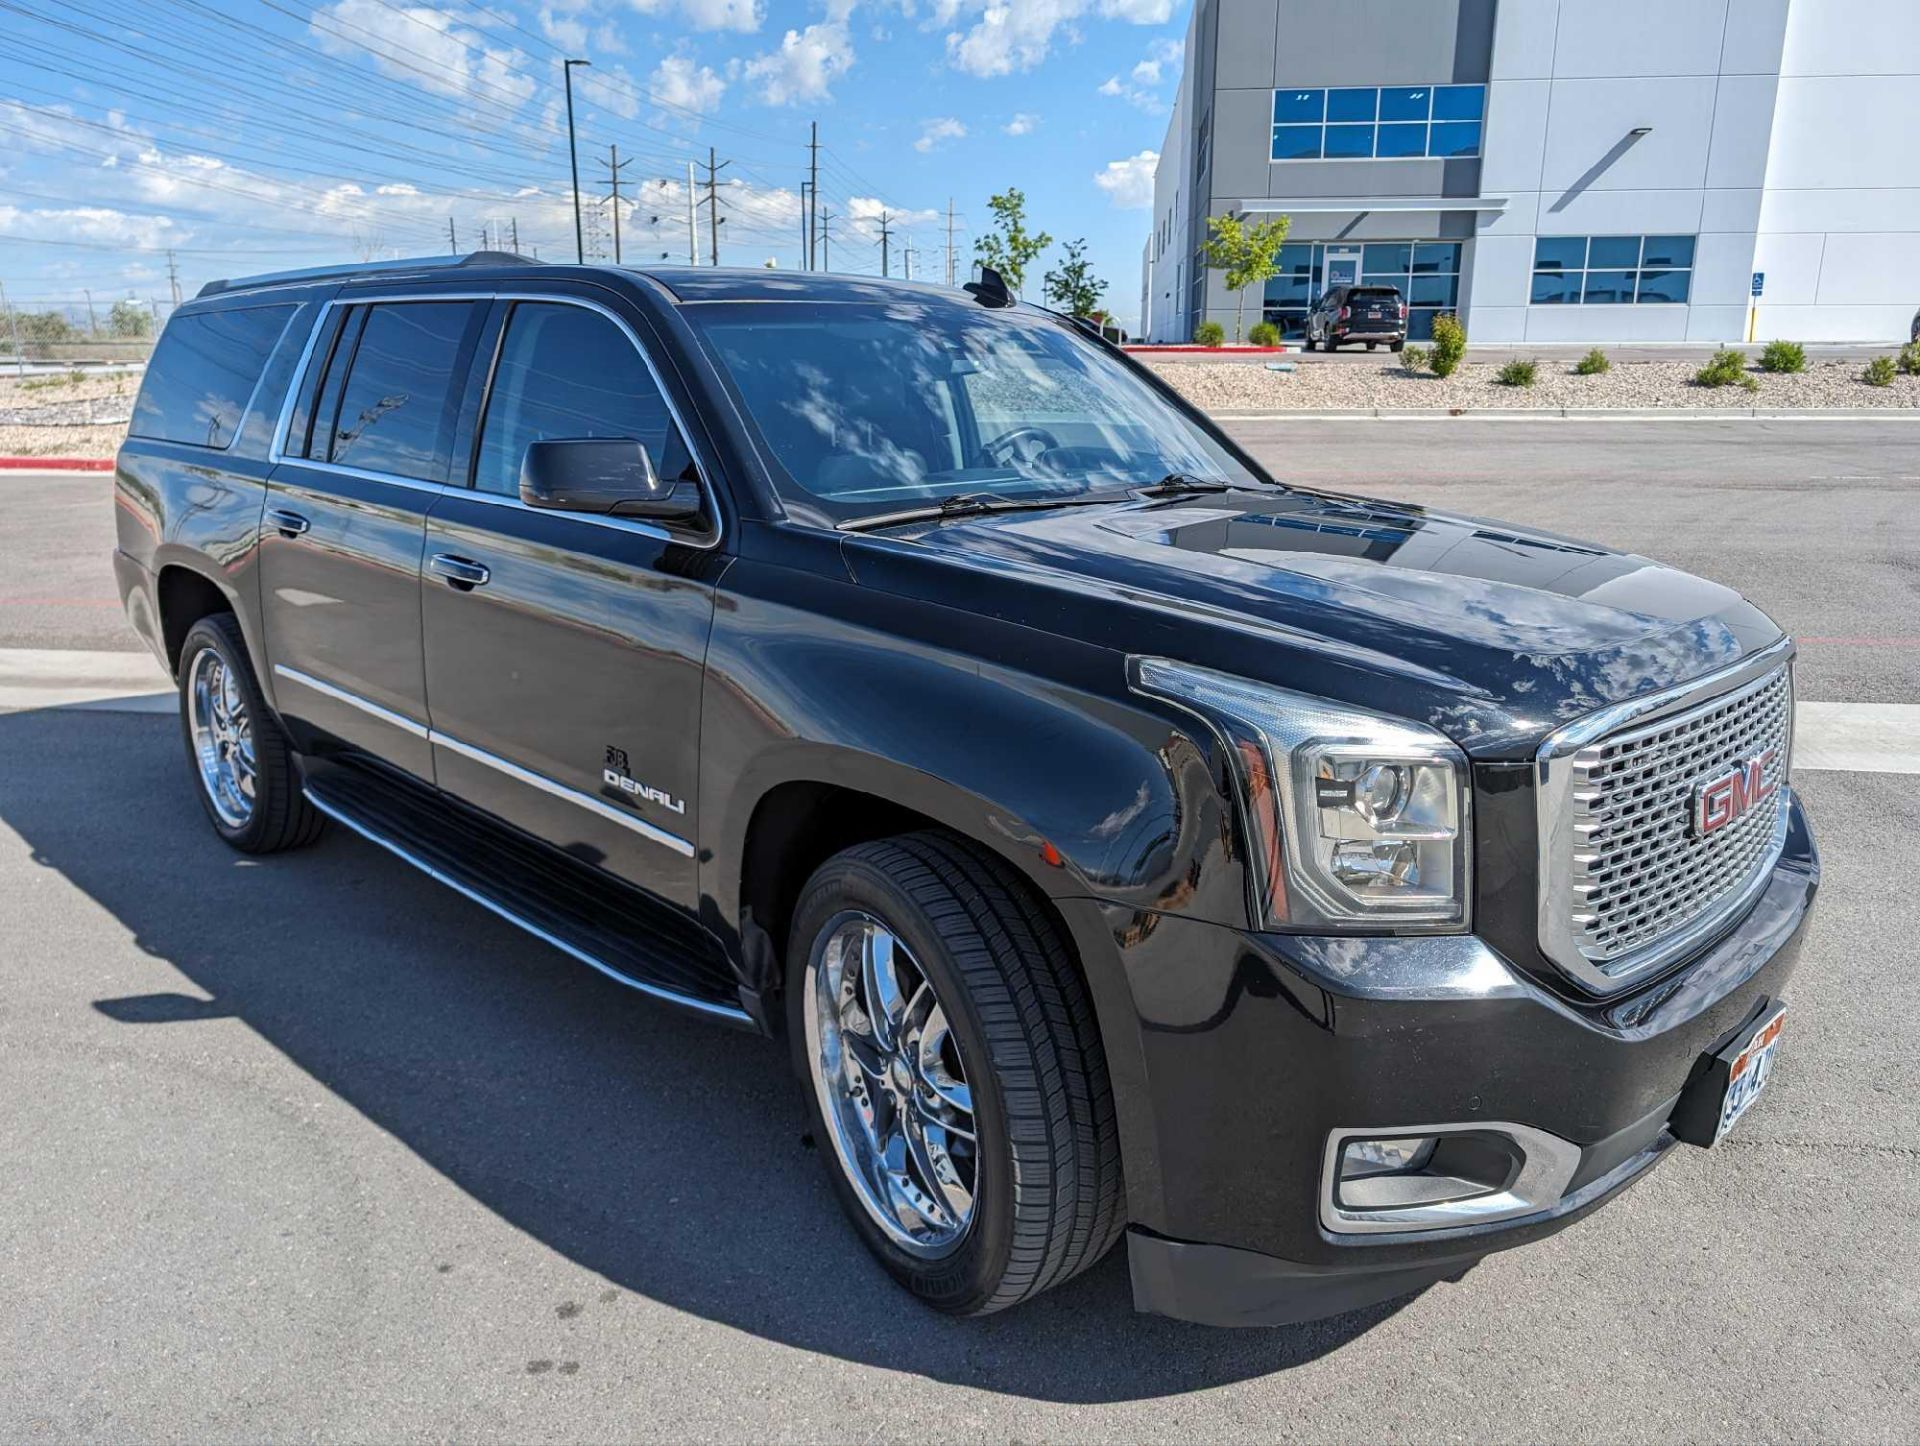 2017 GMC Yukon XL Denali w/ 111K Miles, 4wd, v8 VIN #: 1GKS2HKJ4HR323051 Features & notes: runs and - Image 3 of 16